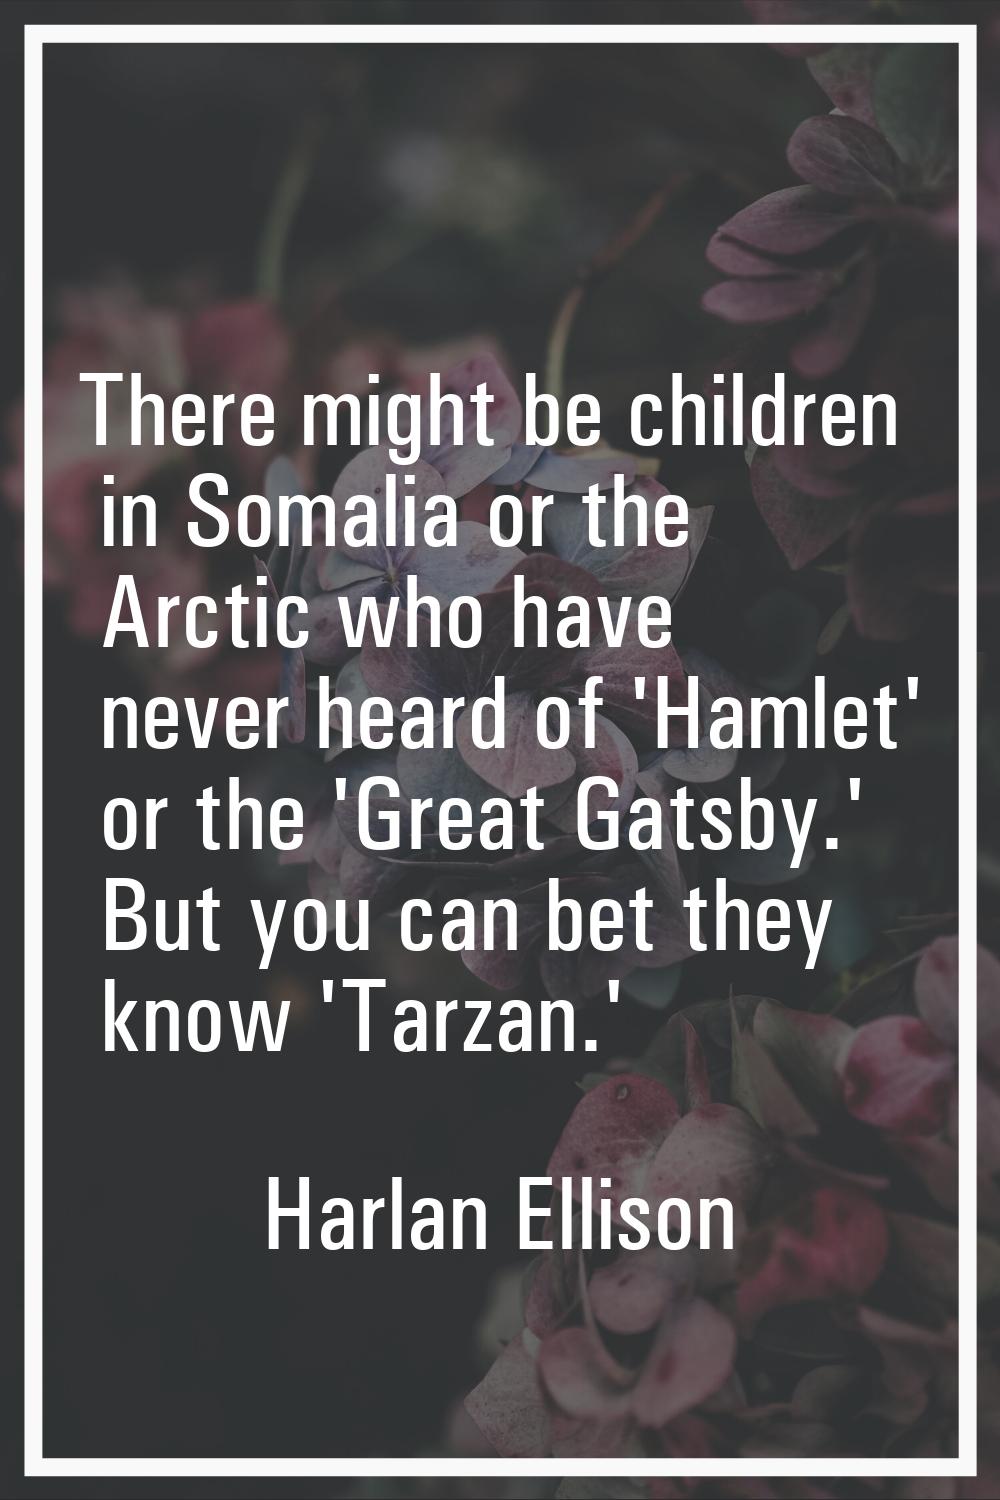 There might be children in Somalia or the Arctic who have never heard of 'Hamlet' or the 'Great Gat